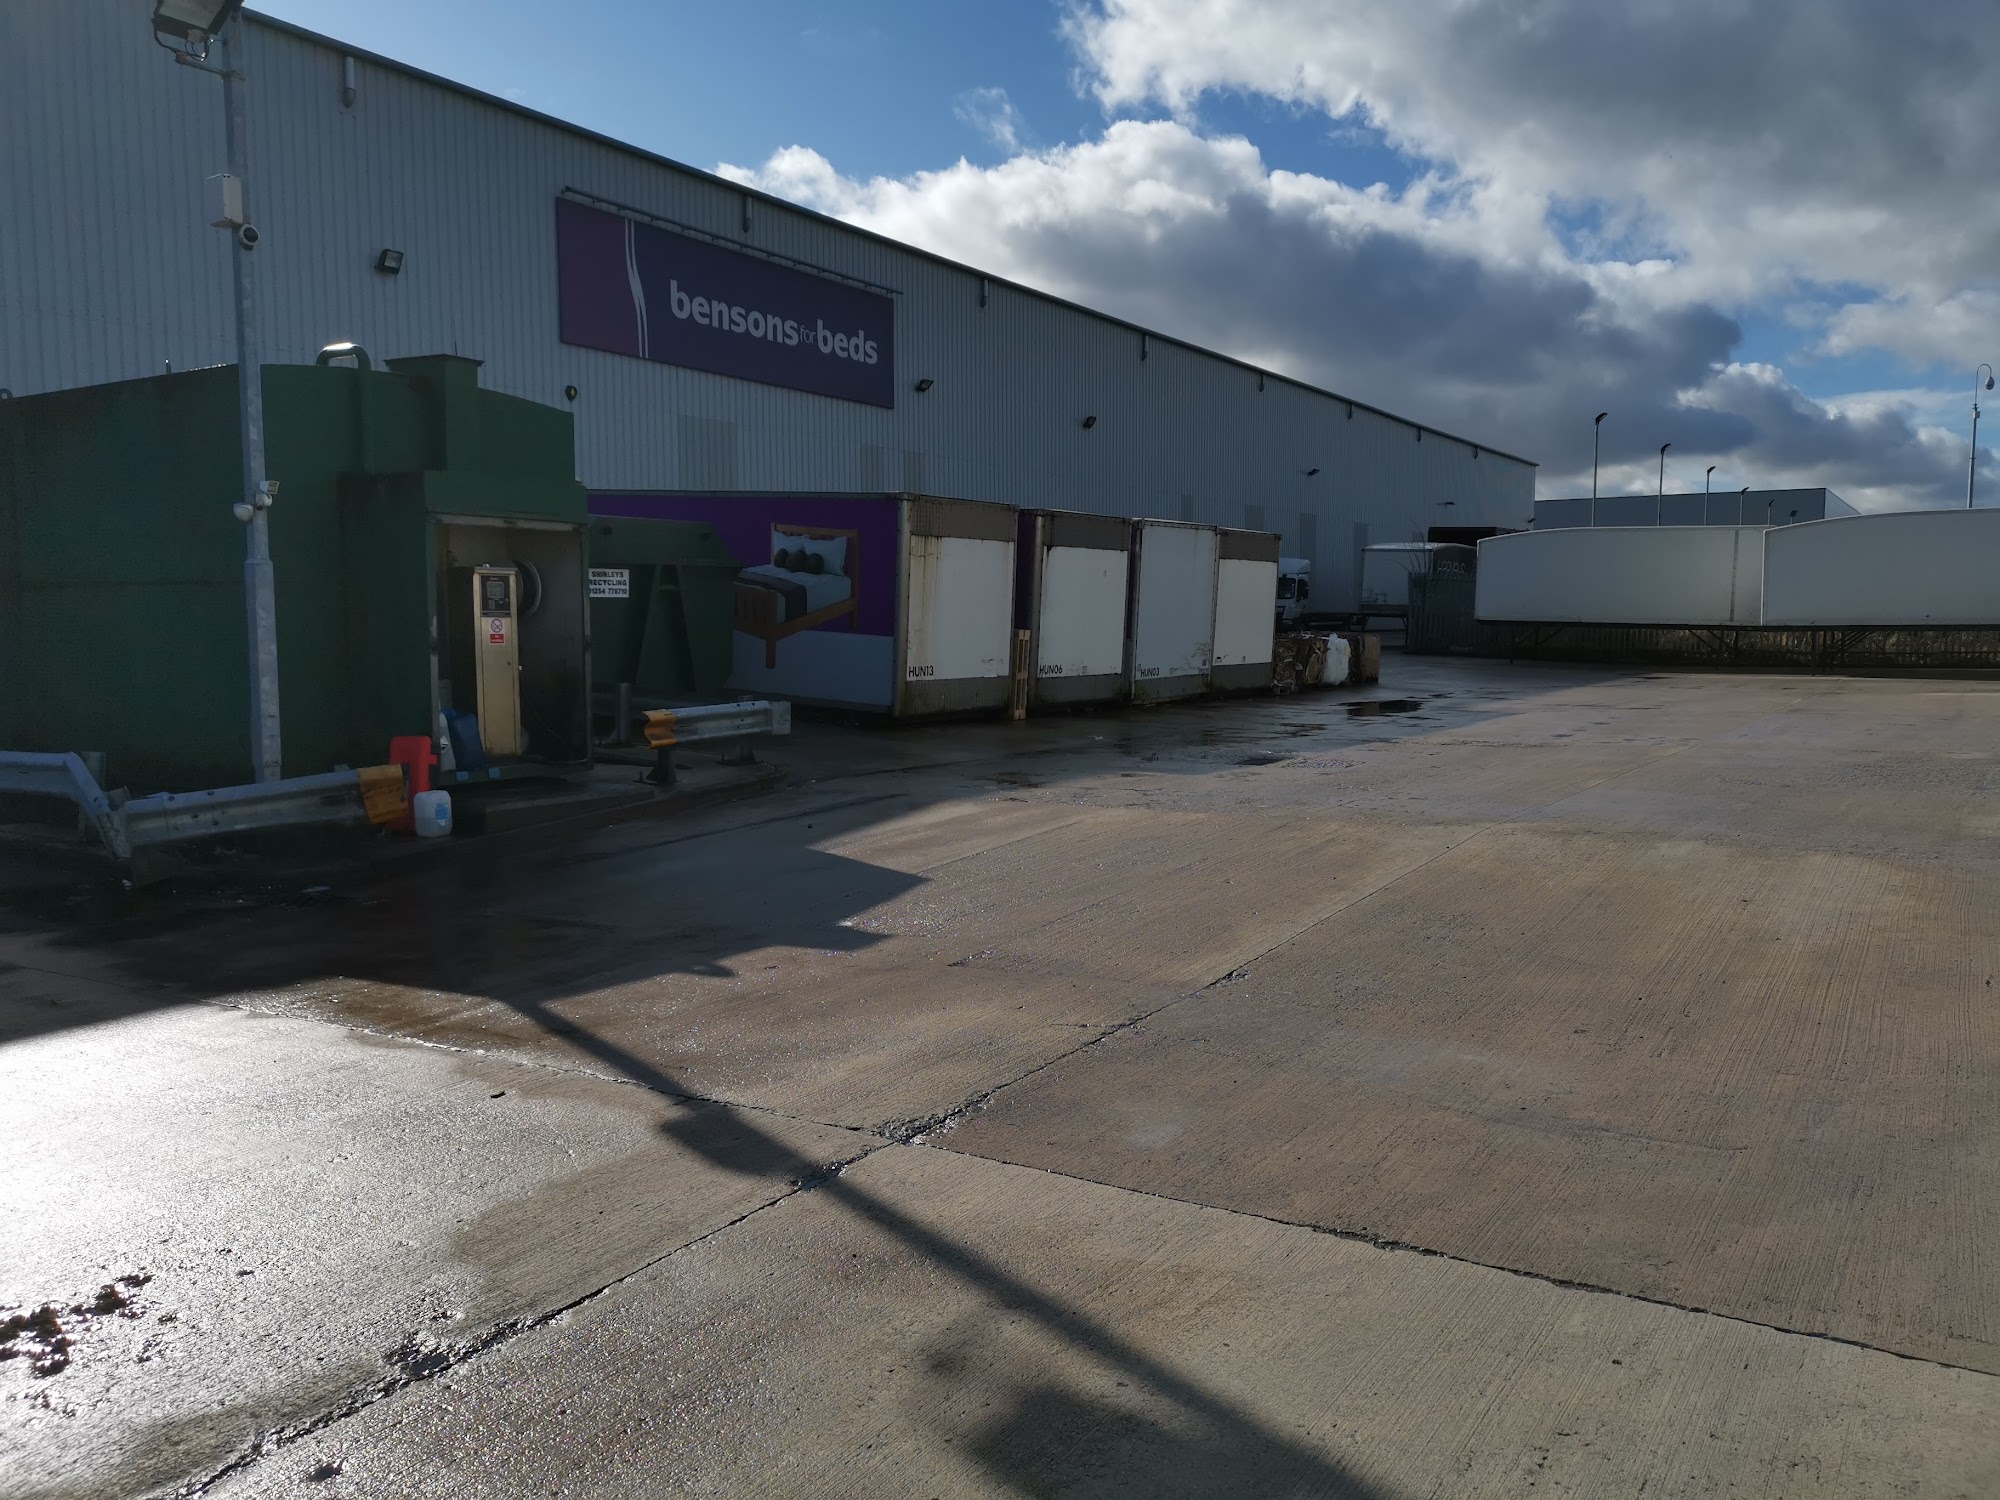 Bensons for Beds Distribution Centre